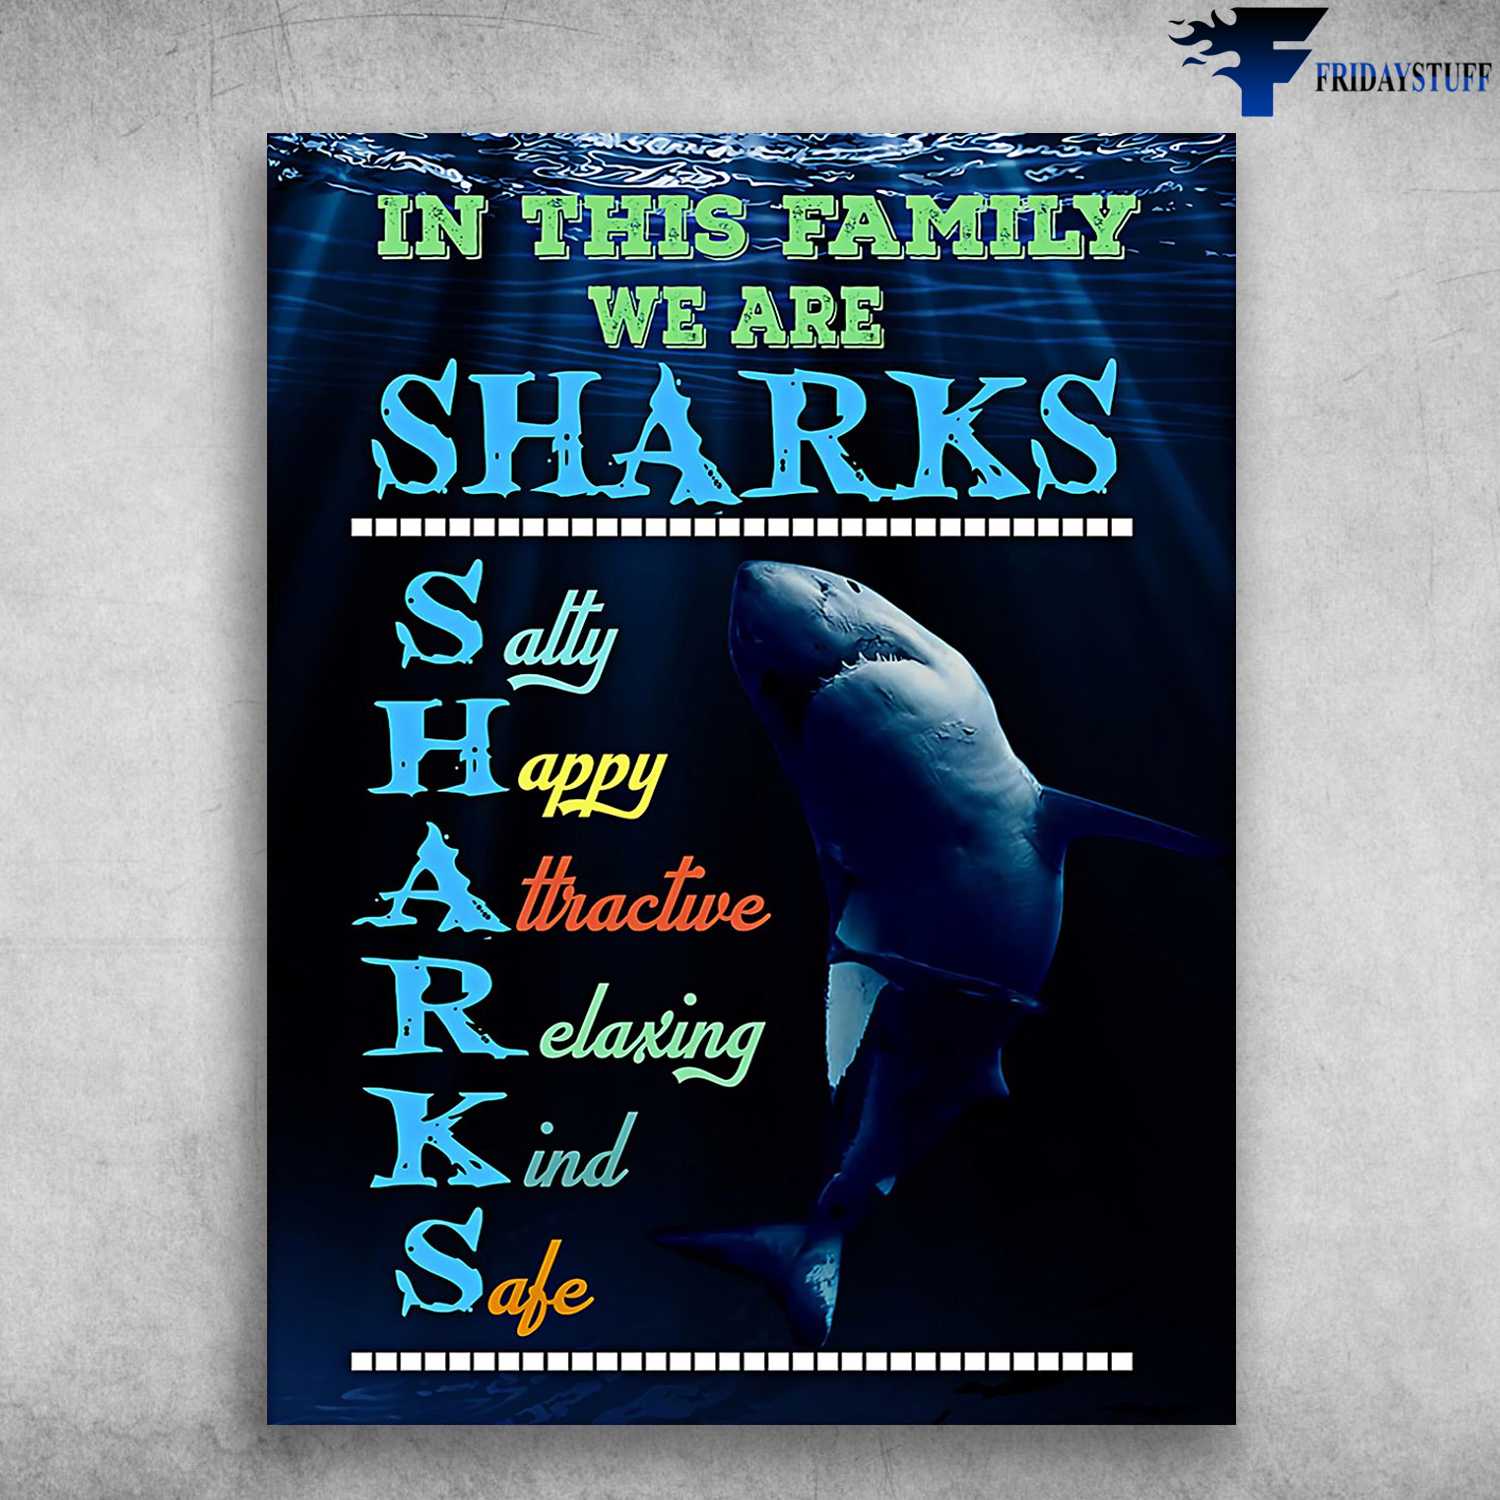 Shark Poster, In This Family, We Are Shark, Sally, Happy, Attractive, Relaxing, Kind, Safe